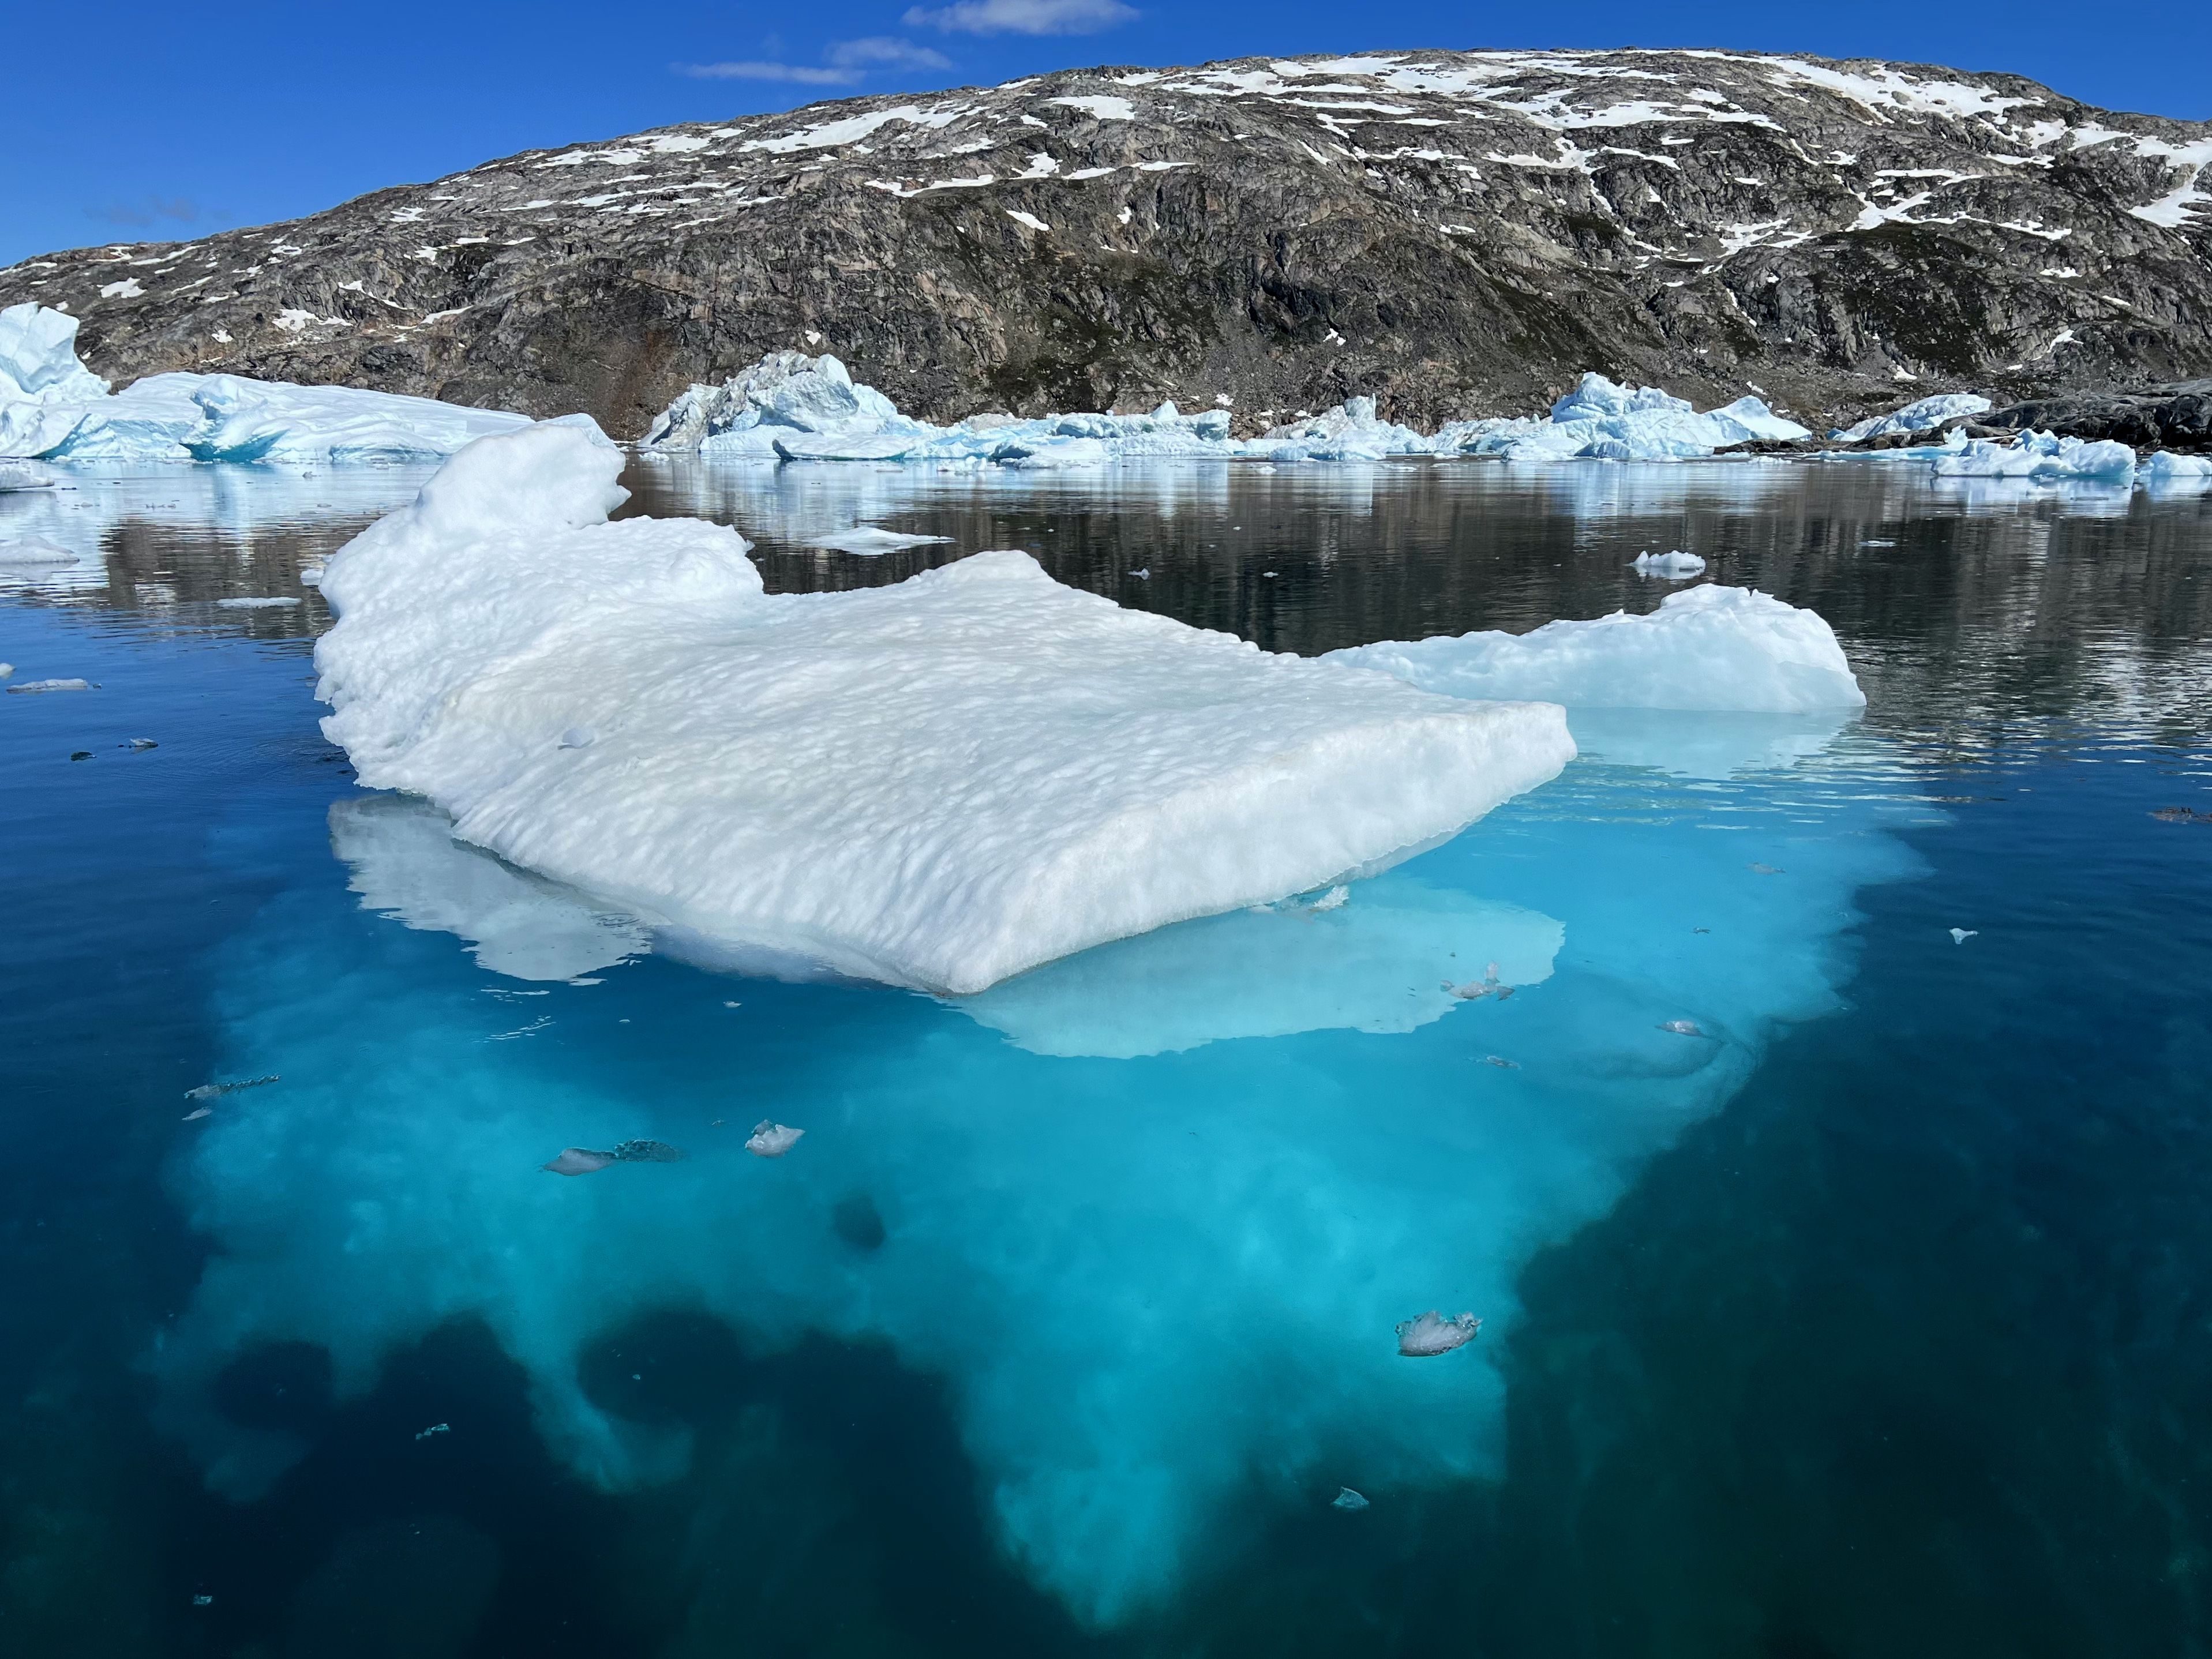 Beverly captured the magical underwater world of melting icebergs with some DIY hydrophones ​ ​ (Picture courtesy of Thomas Rex Beverly)